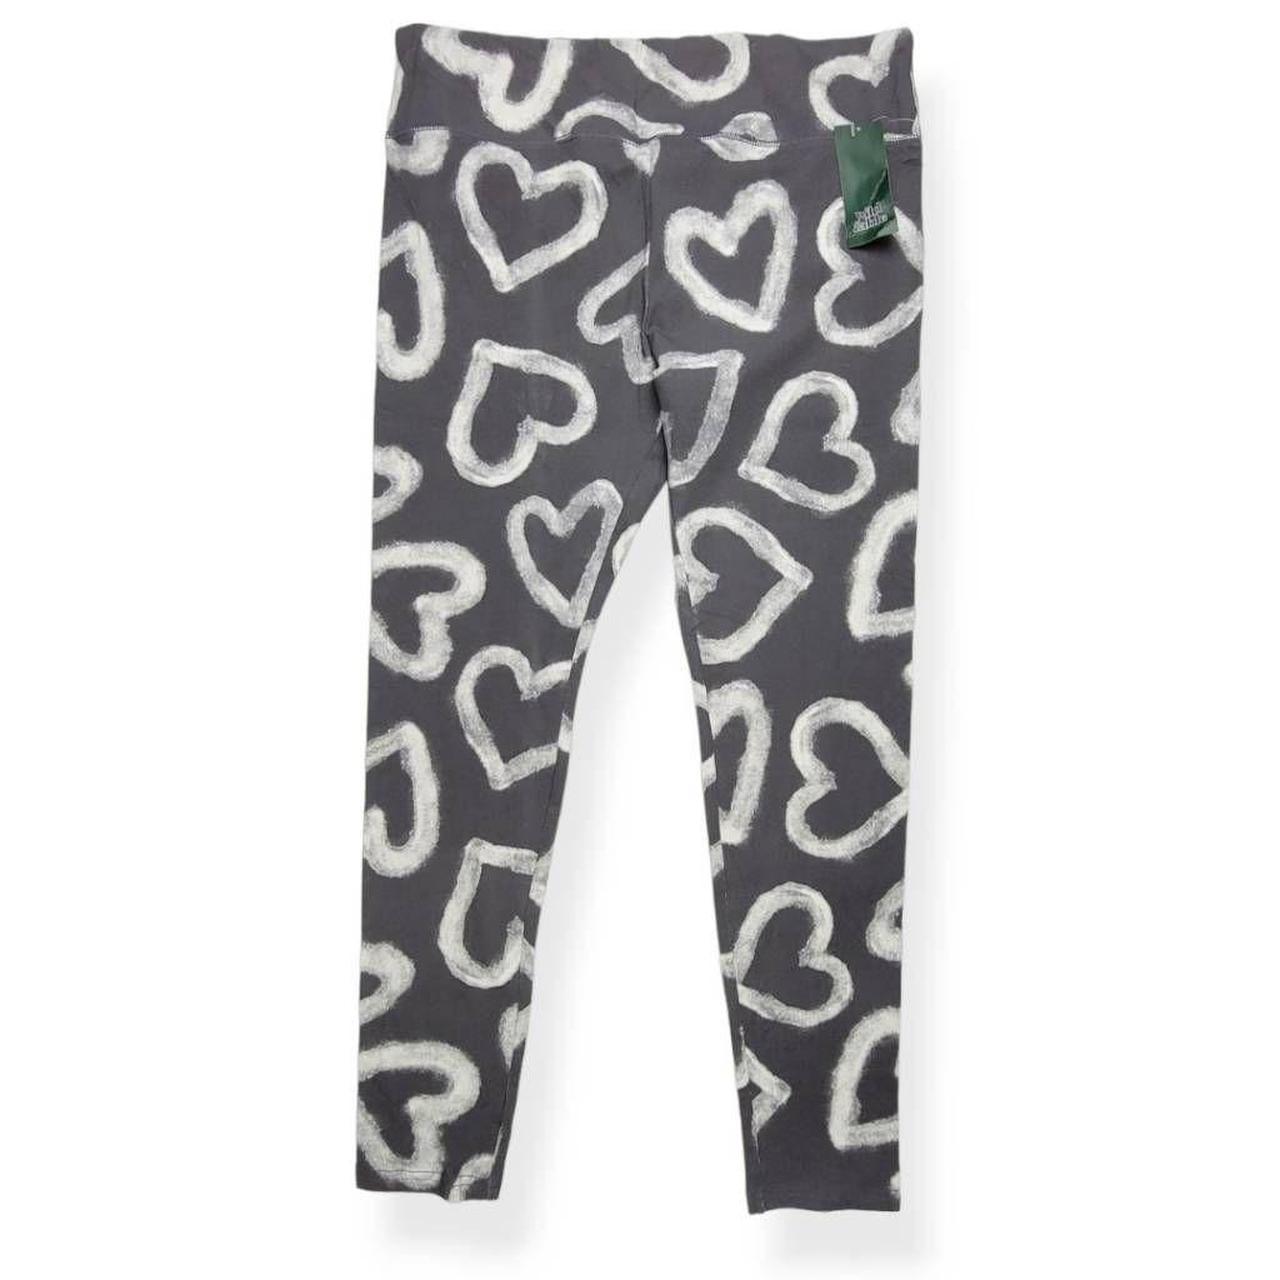 ○ Wild Fable ○ NWT ○ XL ○ Gray with White Hearts ○ - Depop